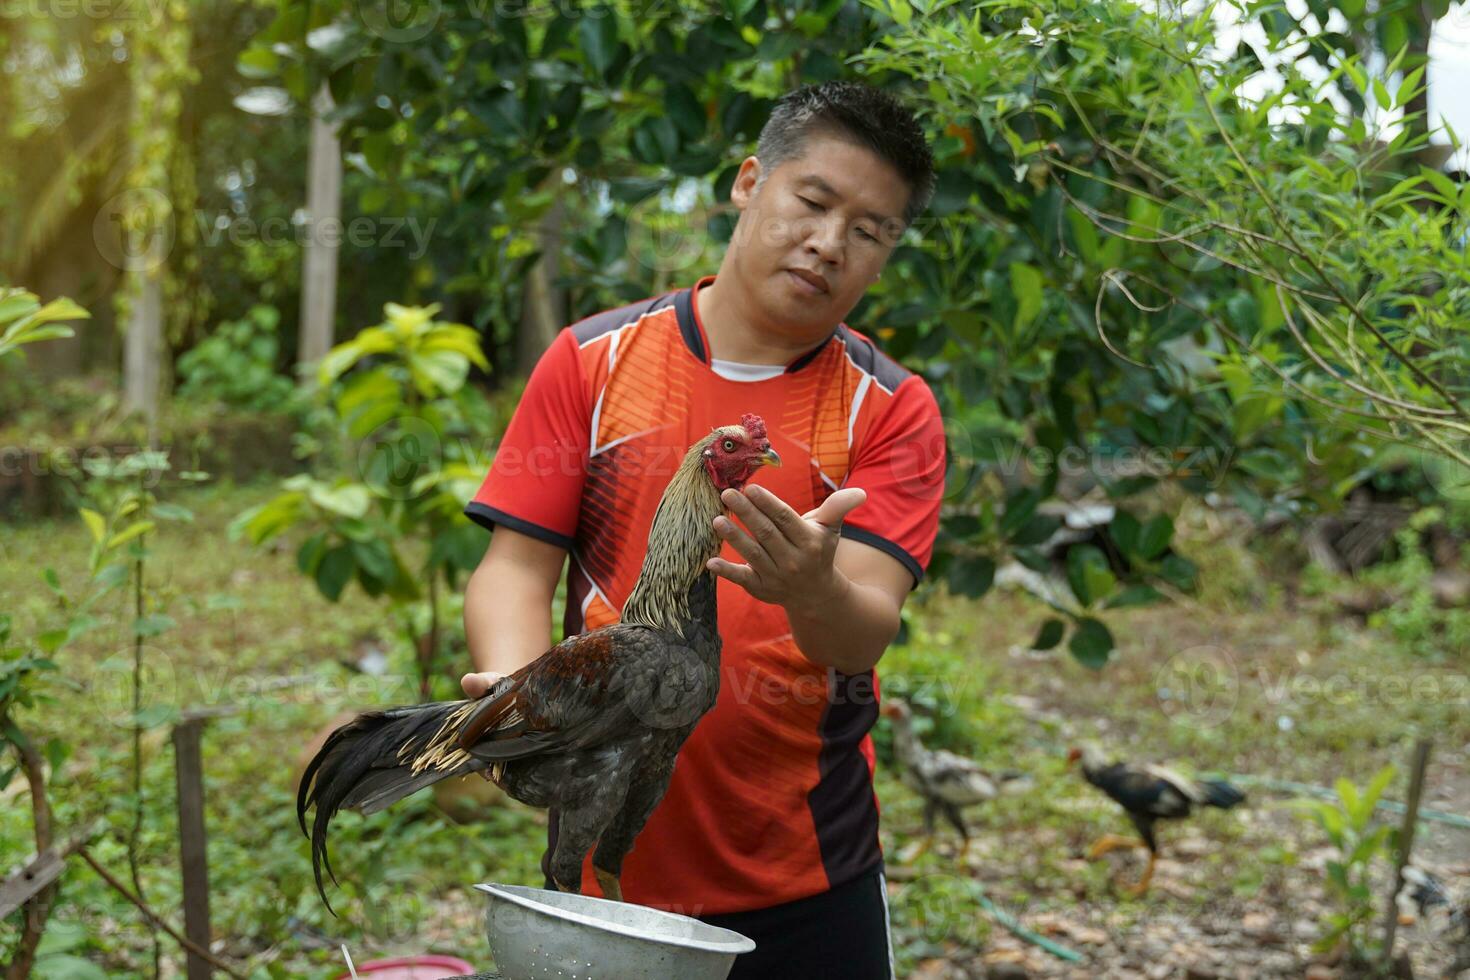 Asian man practices fighting cocks on his pet which is a local breed of chicken raised for sports games Breeding fighting cocks is therefore one profession that generates good income for the breeder. photo